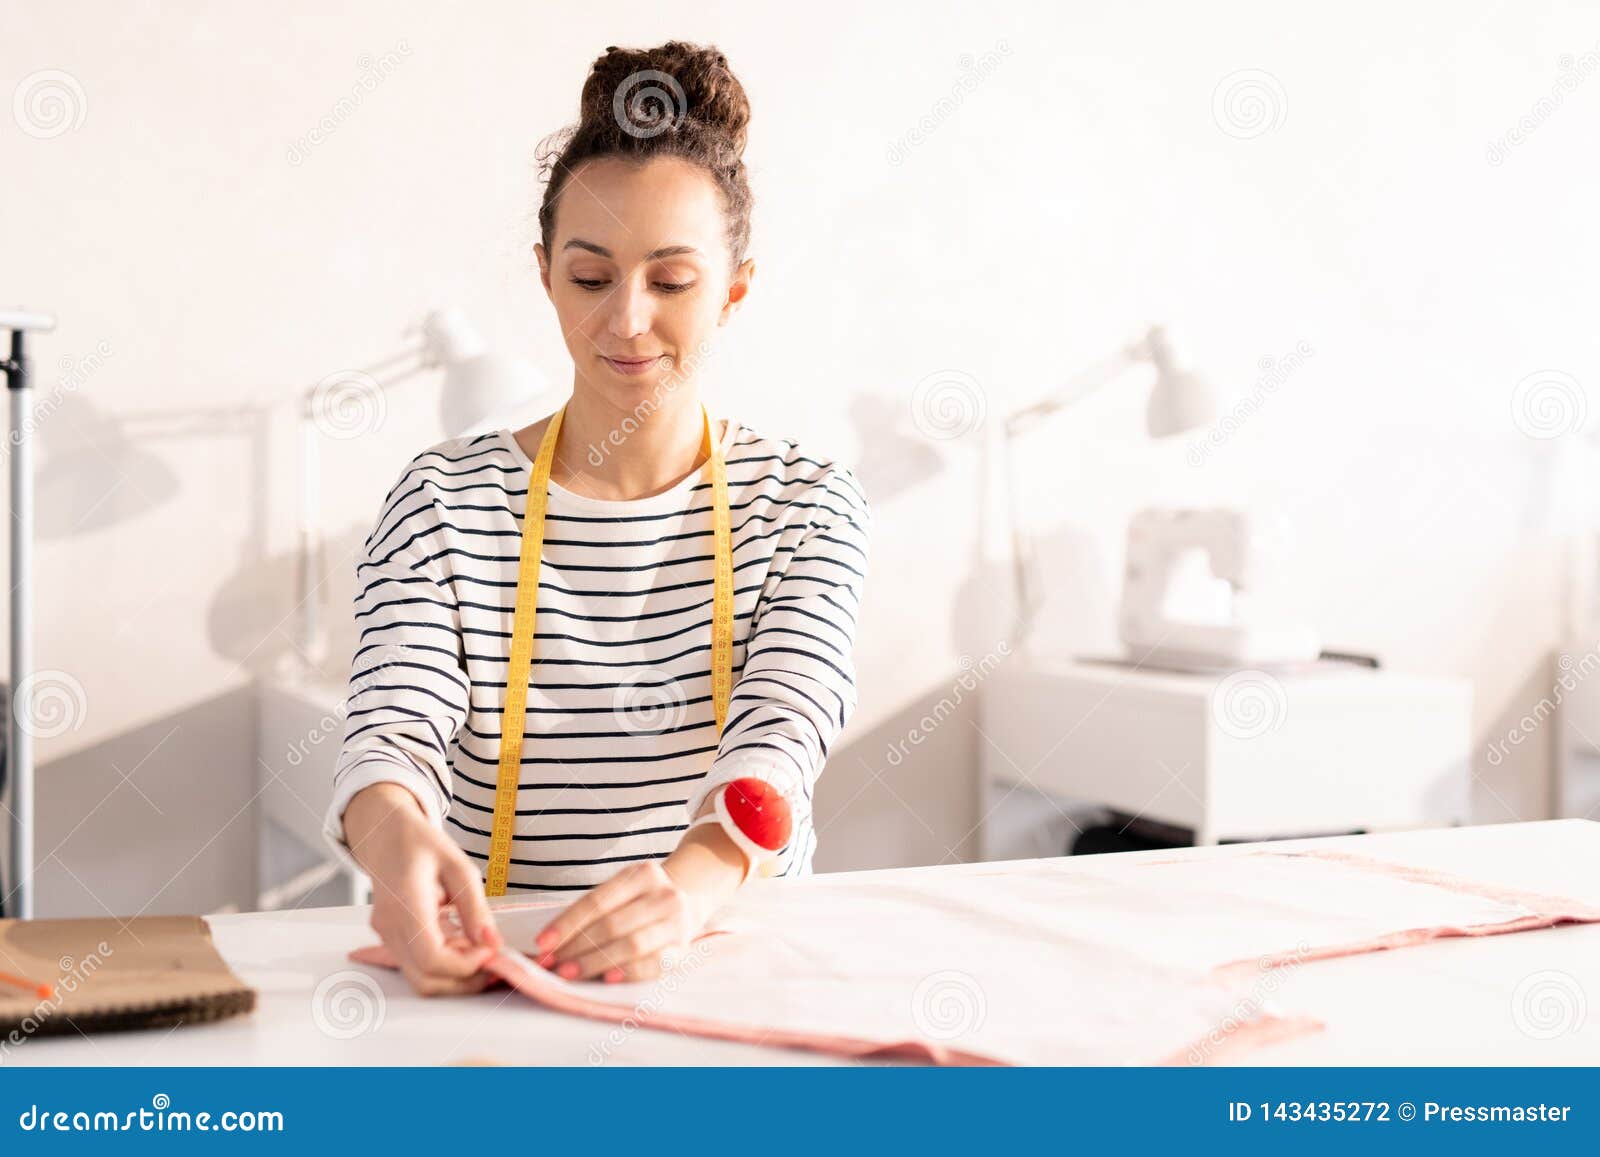 Young seamstress at work stock photo. Image of businesswoman - 143435272